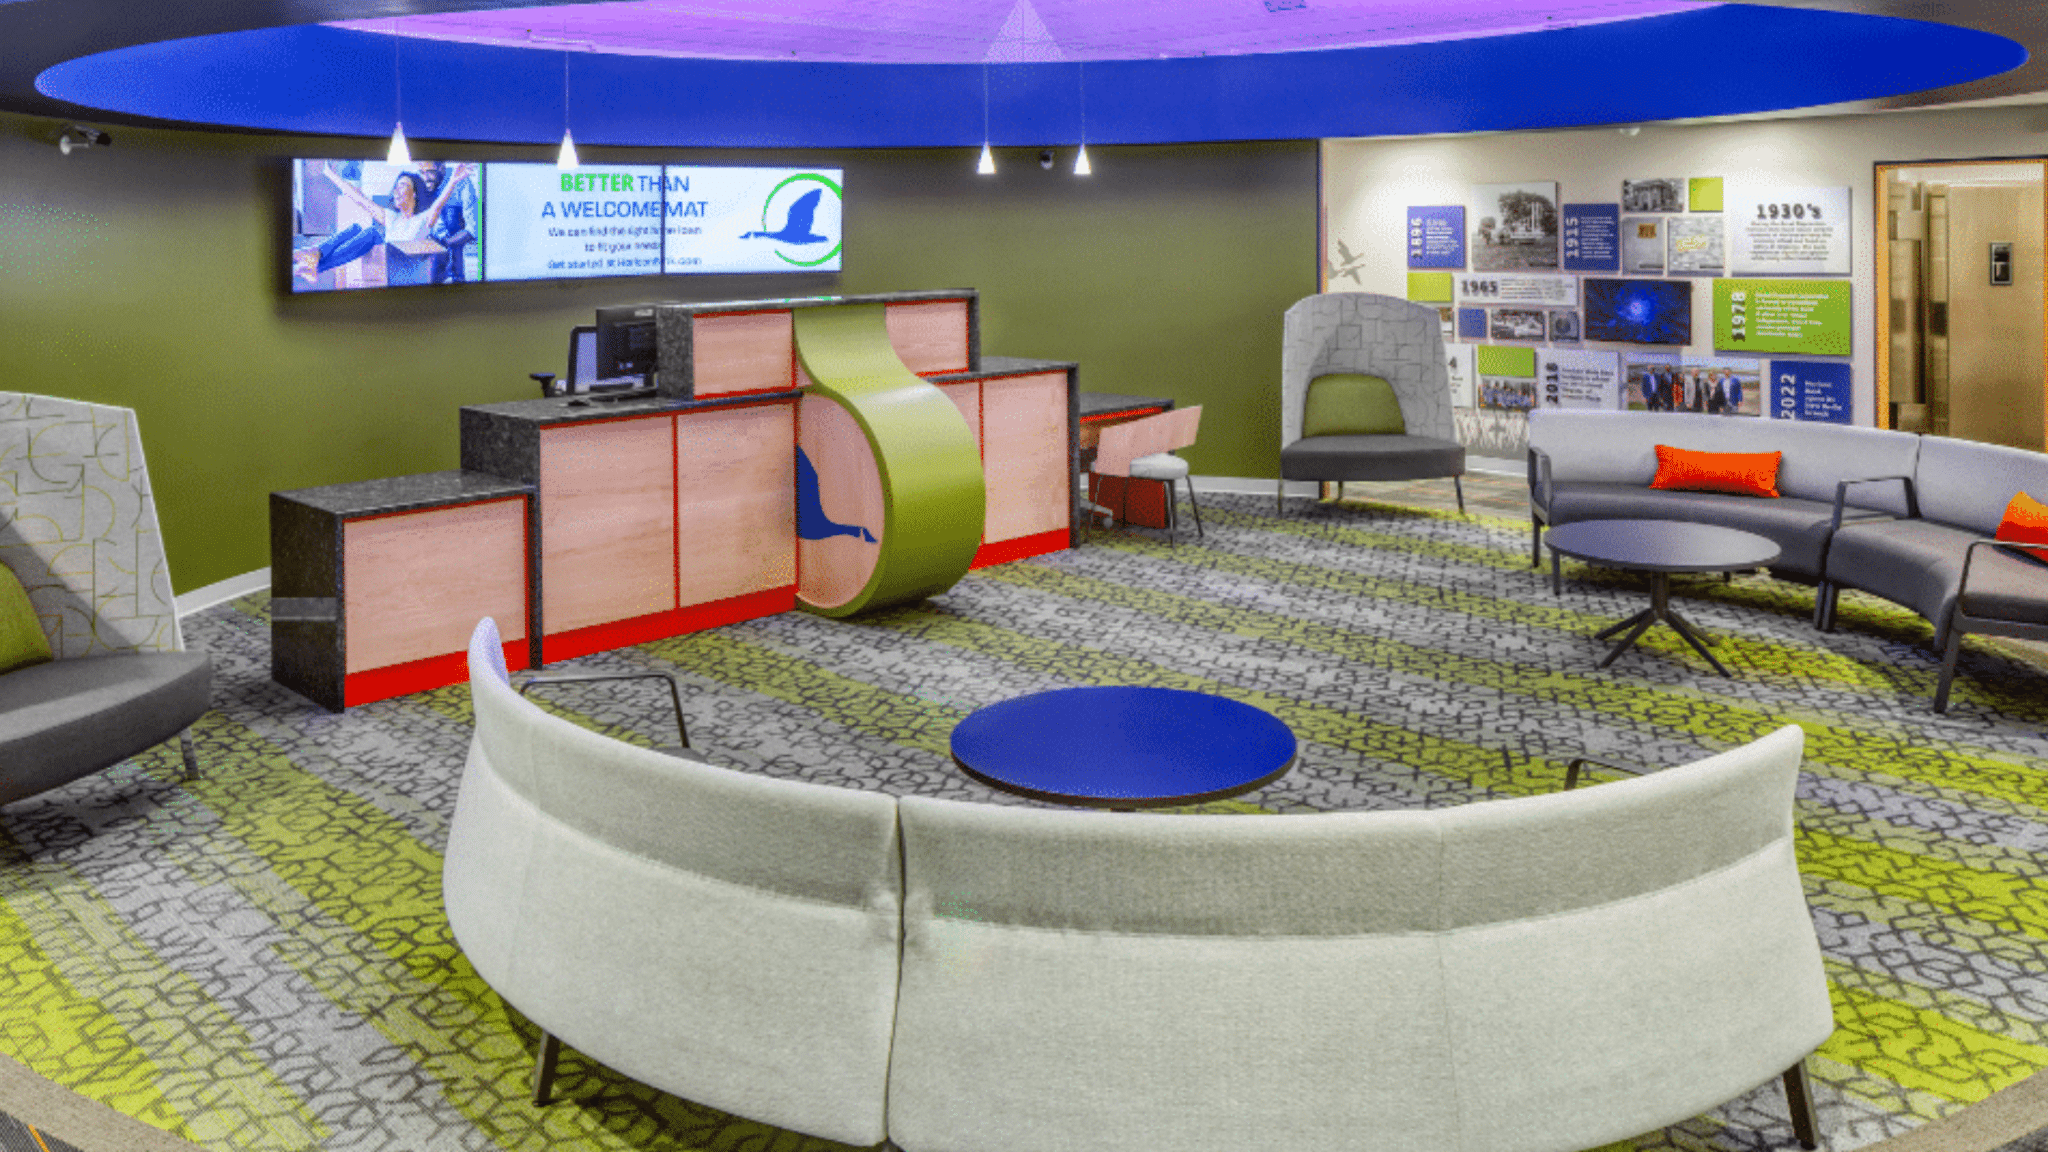 A contemporary workplace with green, grey, blue, and orange design elements that showcase a unique reception desk design